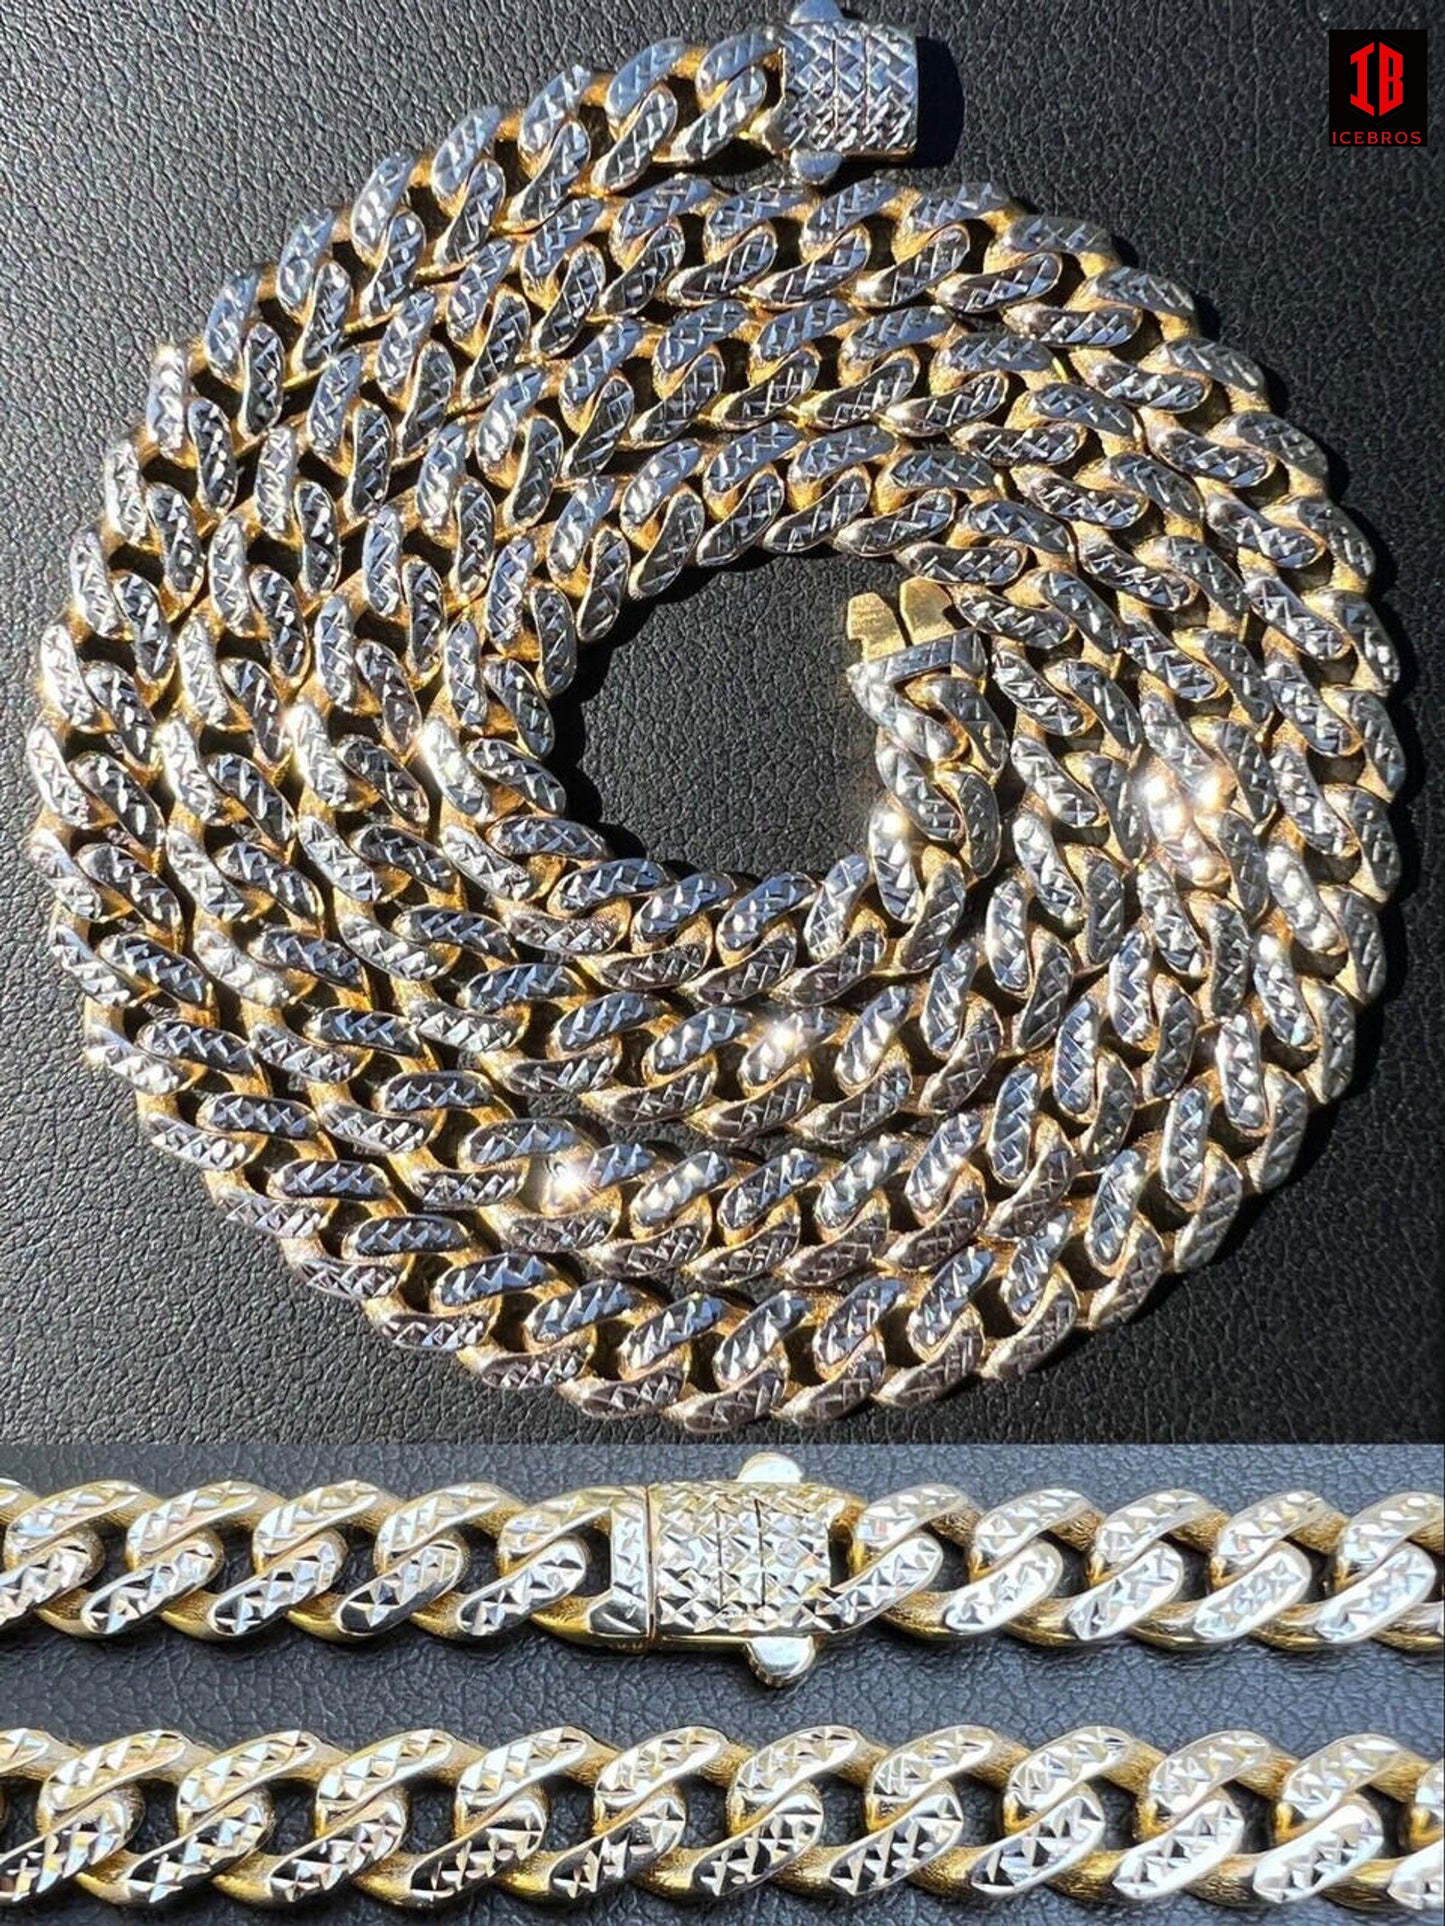 14kT HOLLOW Light 6.5mm Genuine Yellow Gold Miami Cuban Link Chain Diamond Cut Necklace Two Tone